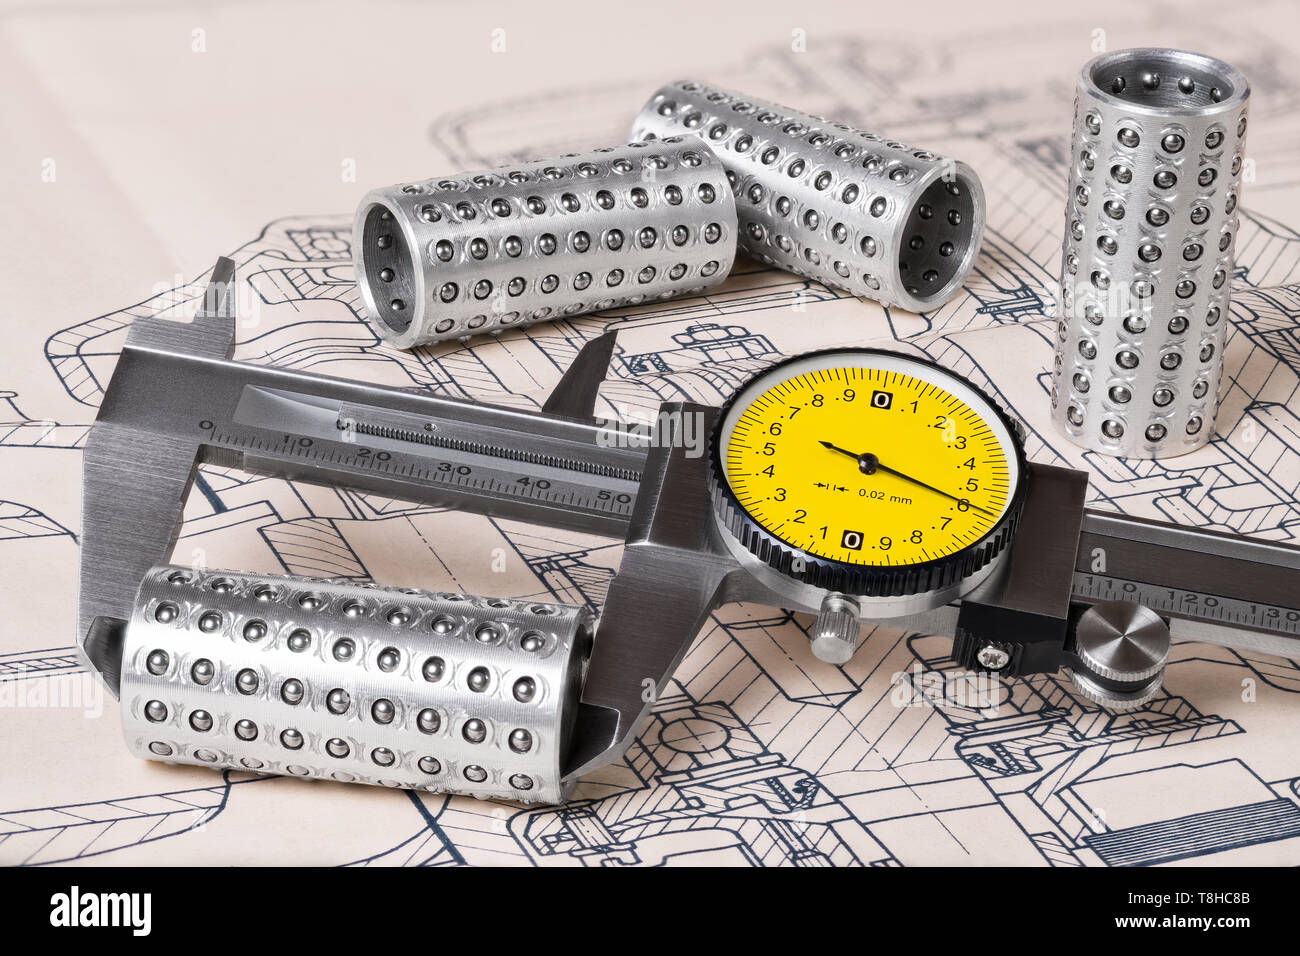 Linear ball bearings measurement. Caliper gauge. Technical drafting. Measuring of steel rollers and plan. Metallic vernier tool with round yellow dial. Stock Photo